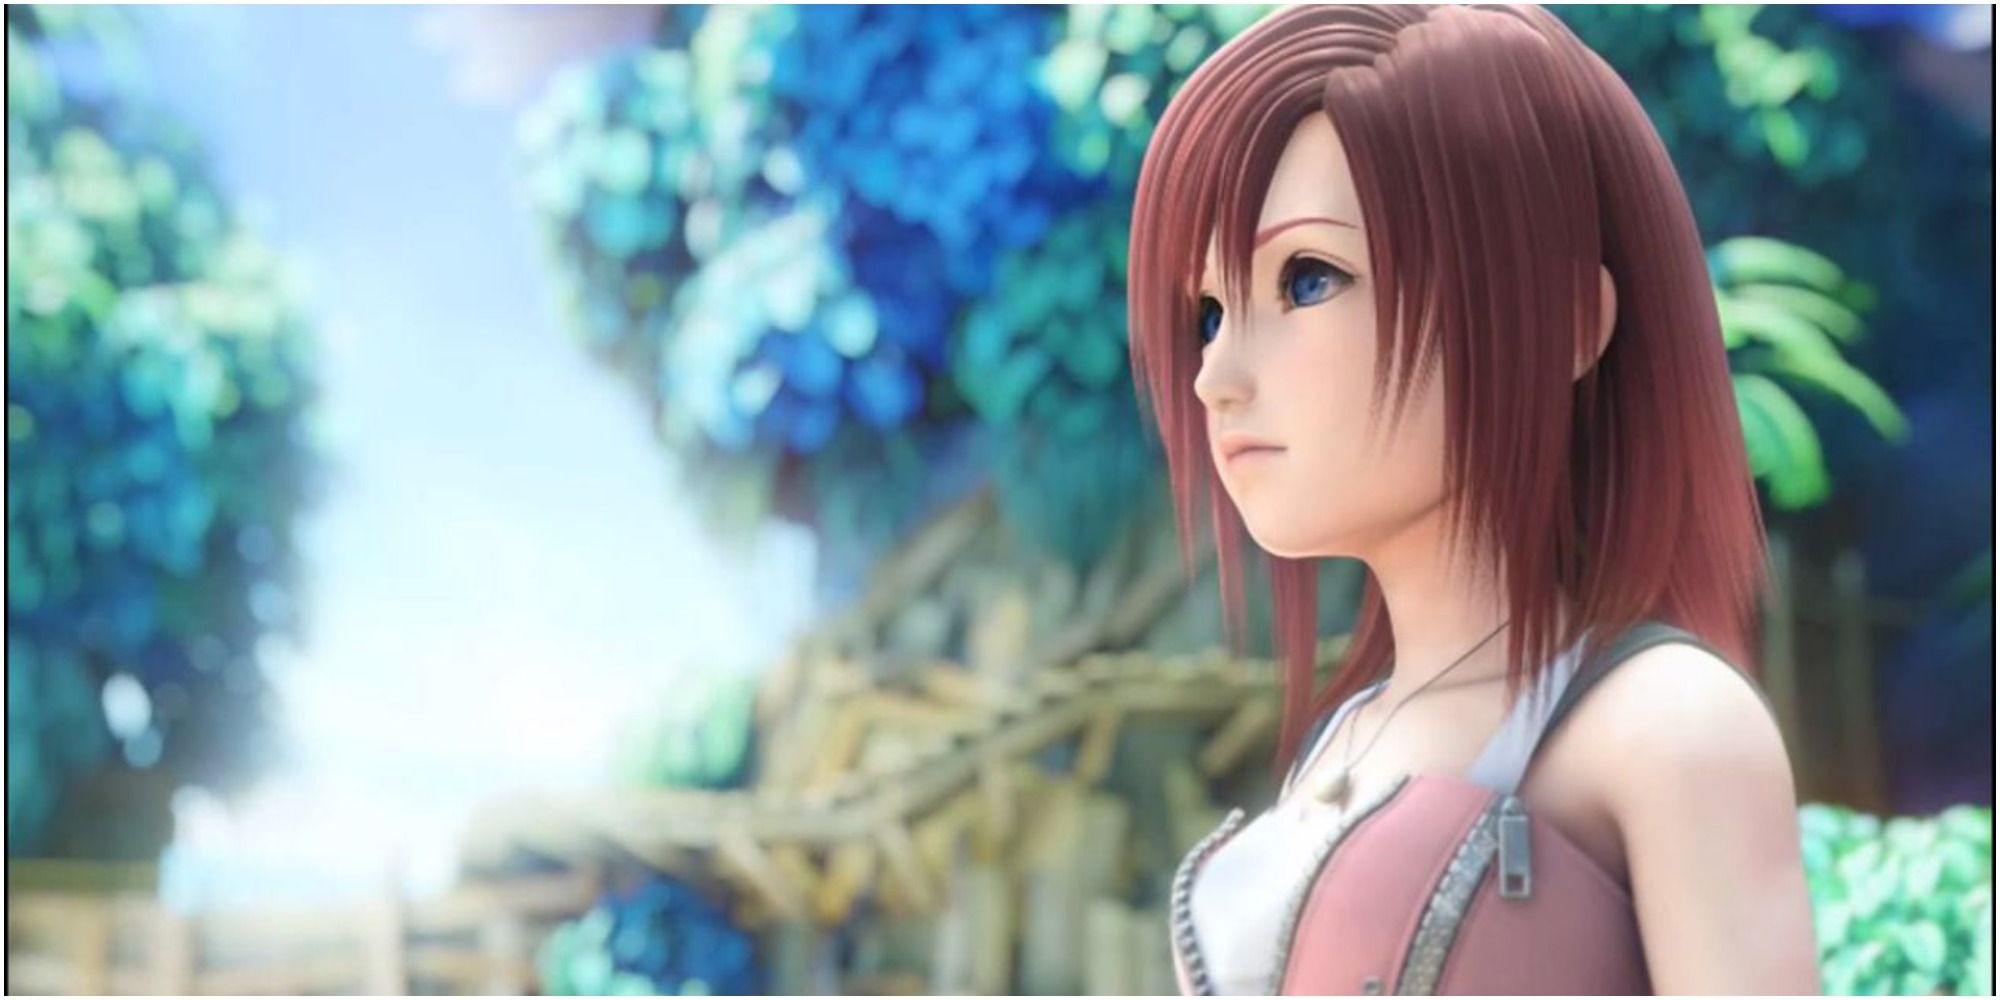 An image of Kairi from the opening cinematic of Kingdom Hearts II